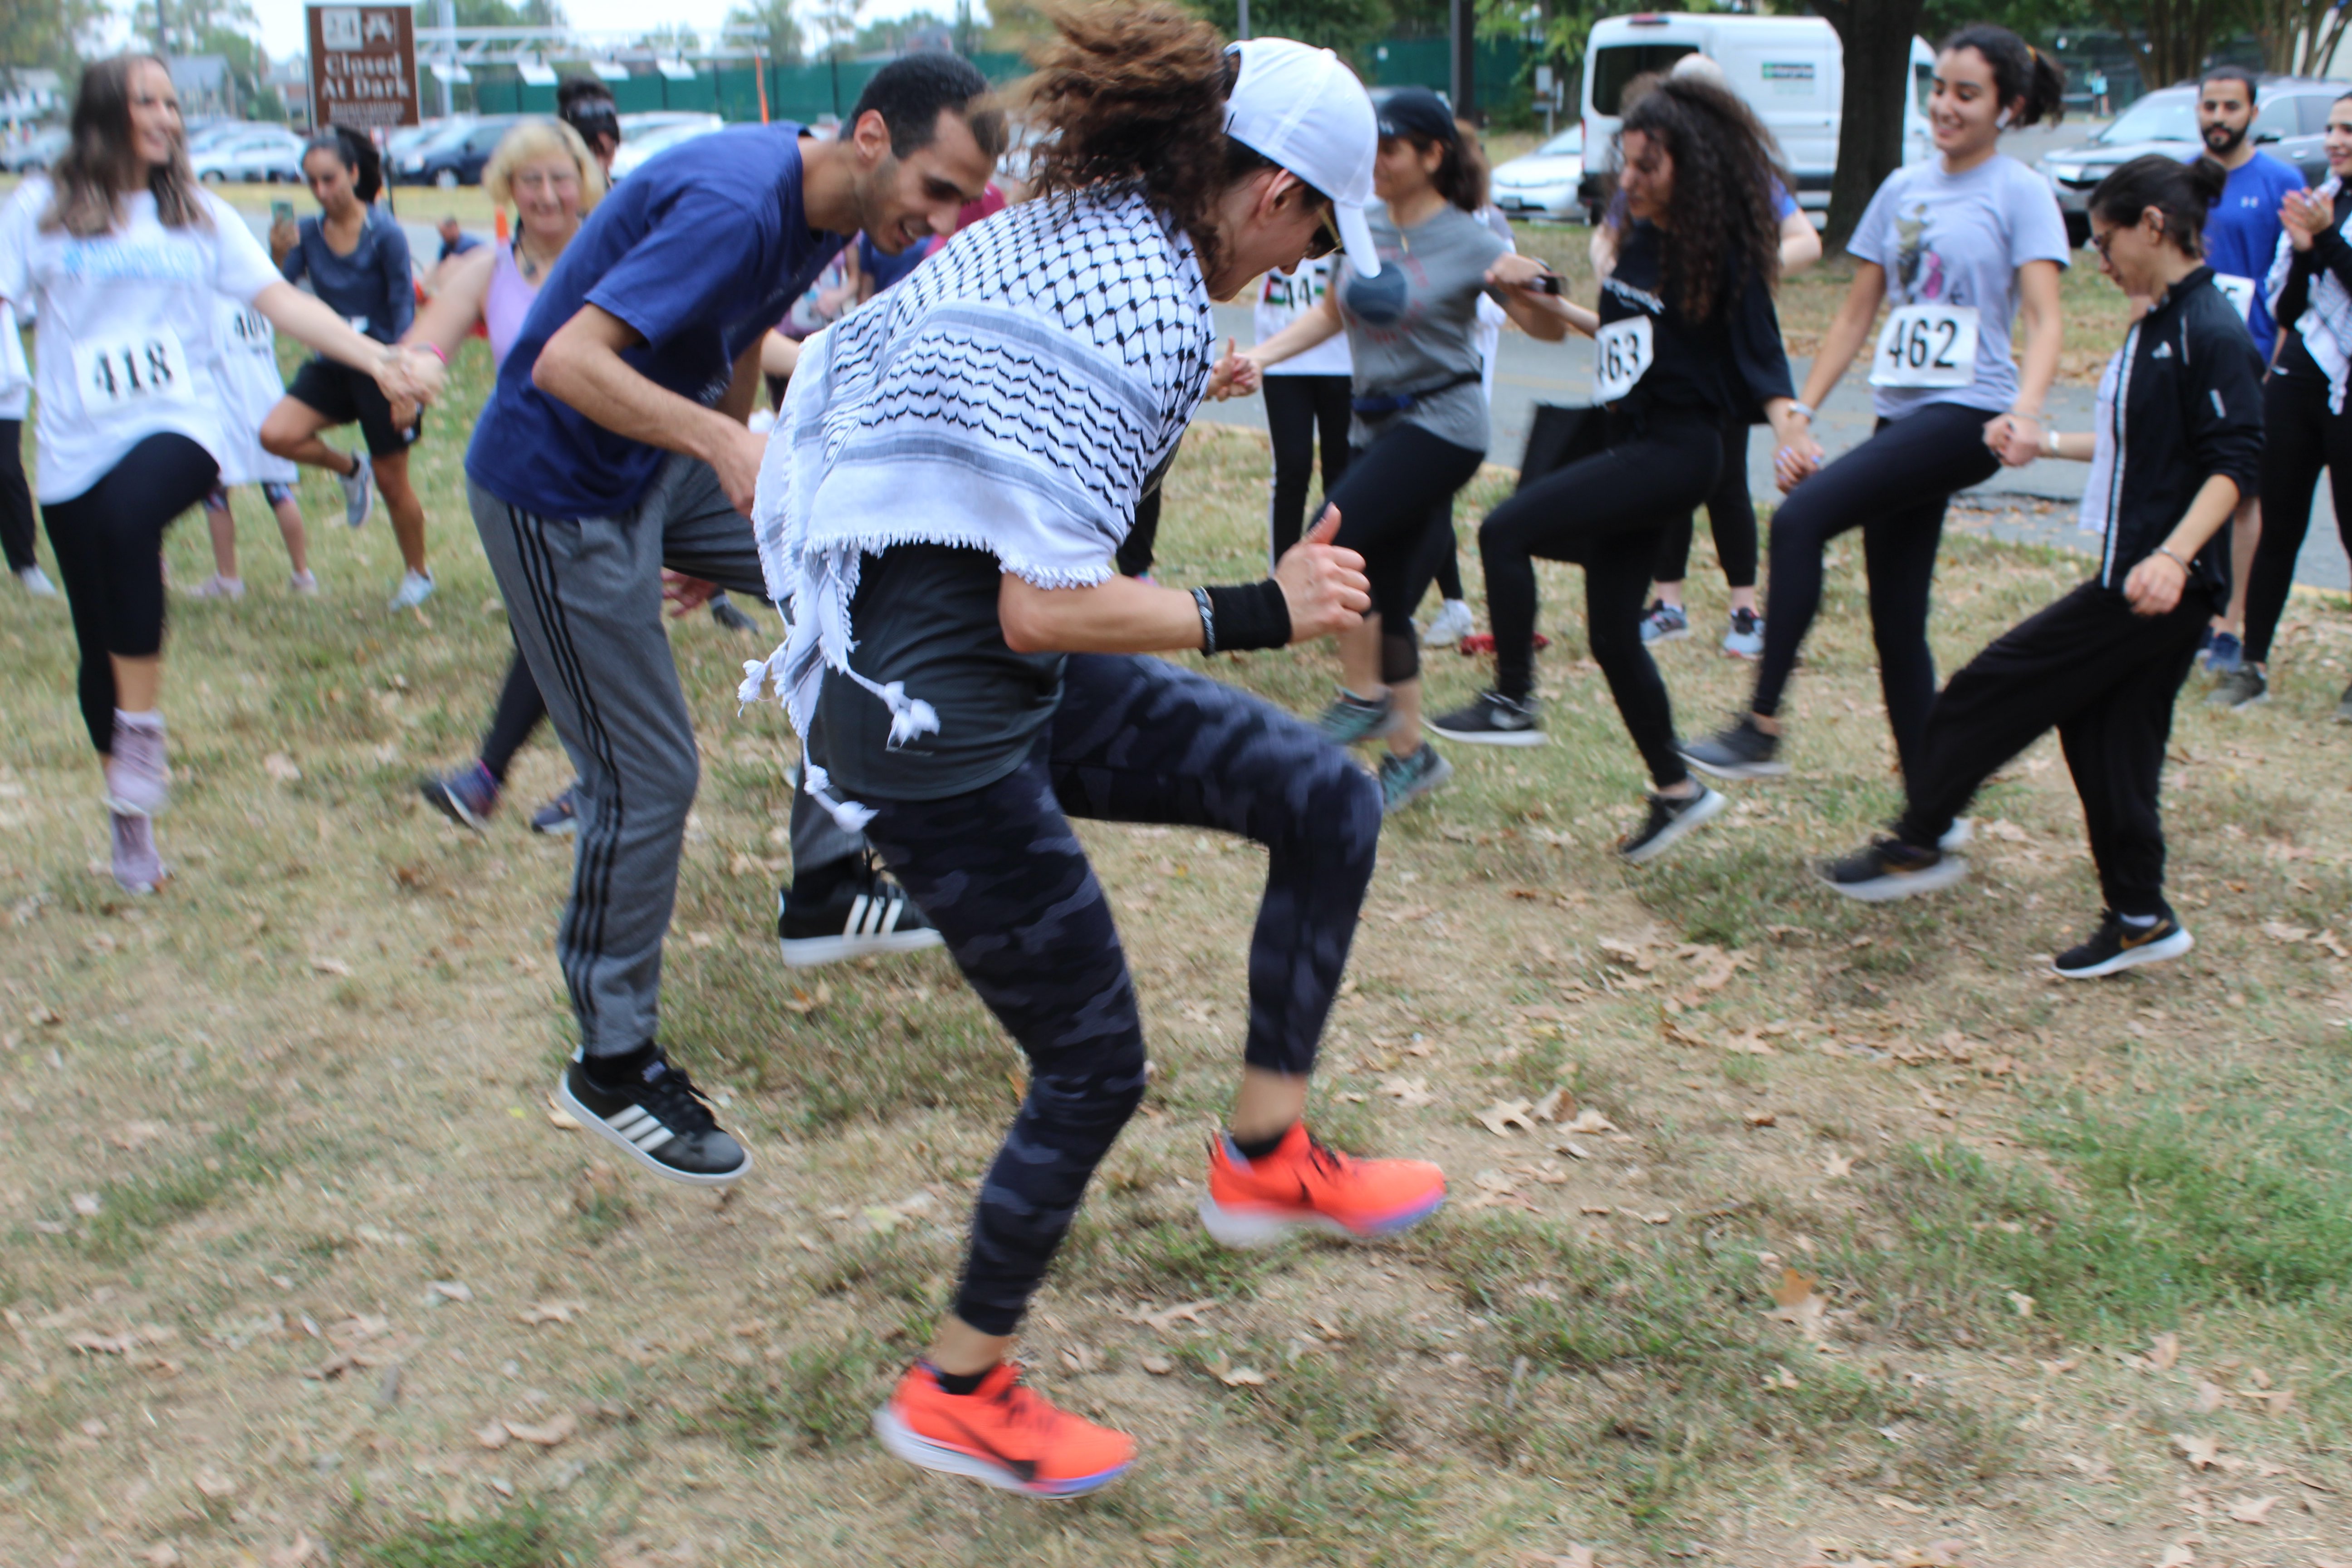 Two dancers take their dabka to another level after teaching beginners the basics at the Gaza 5k event (MEE/Sheren Khalel)